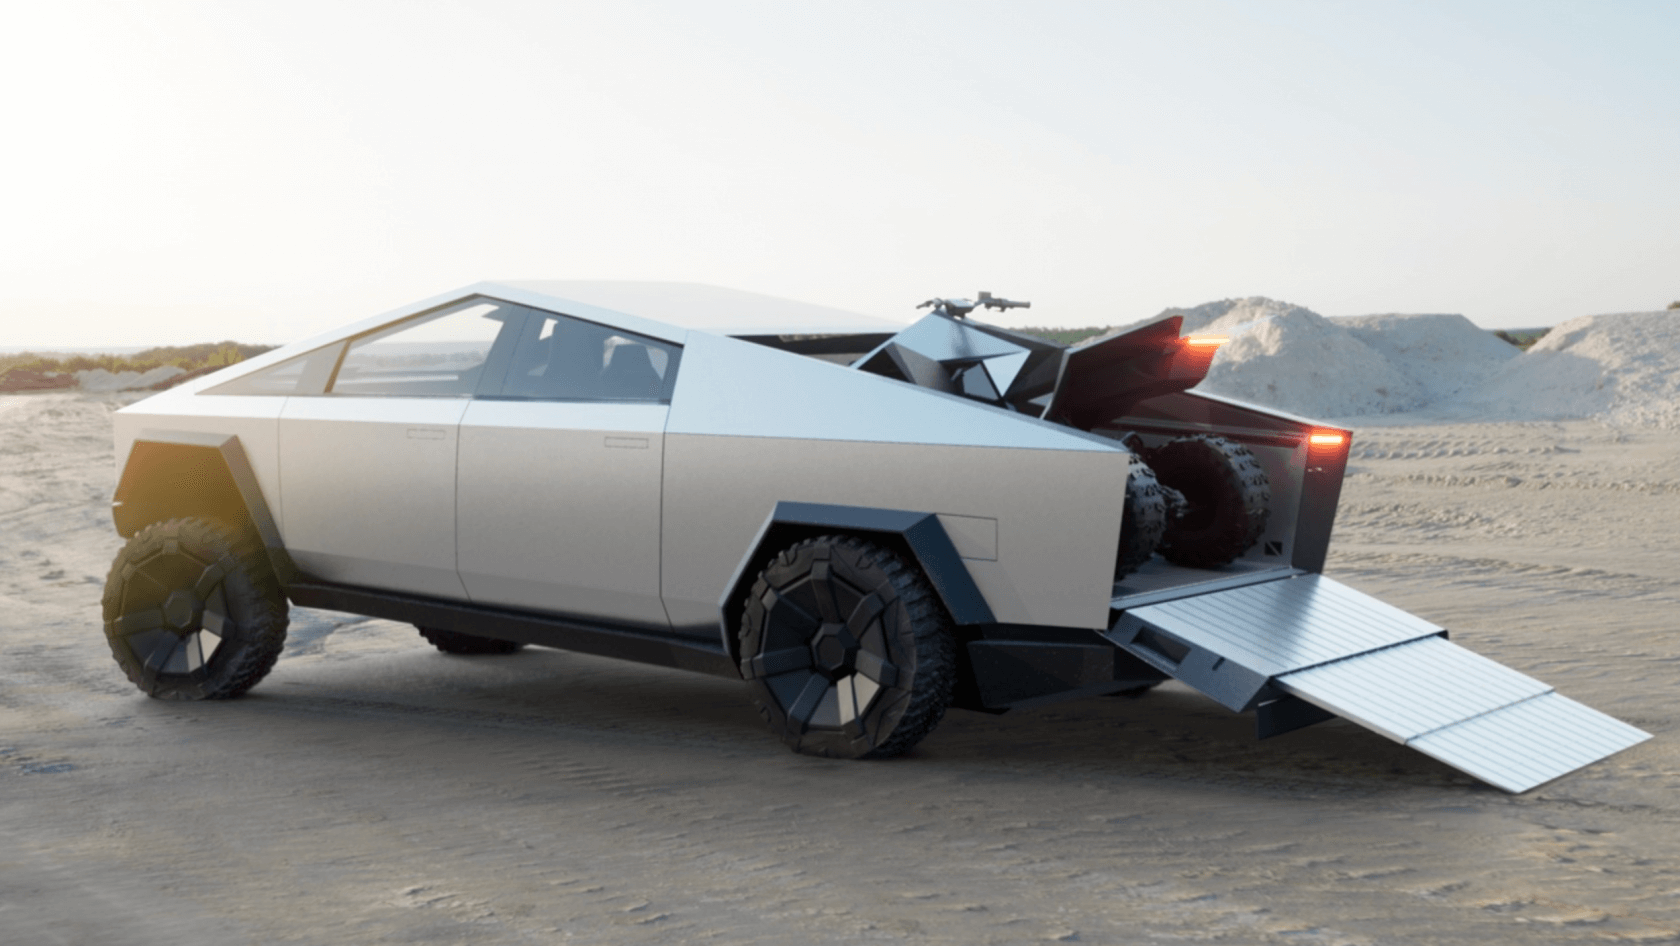 Tesla's 'Cyberquad' ATV will ship as an add-on for the Cybertruck